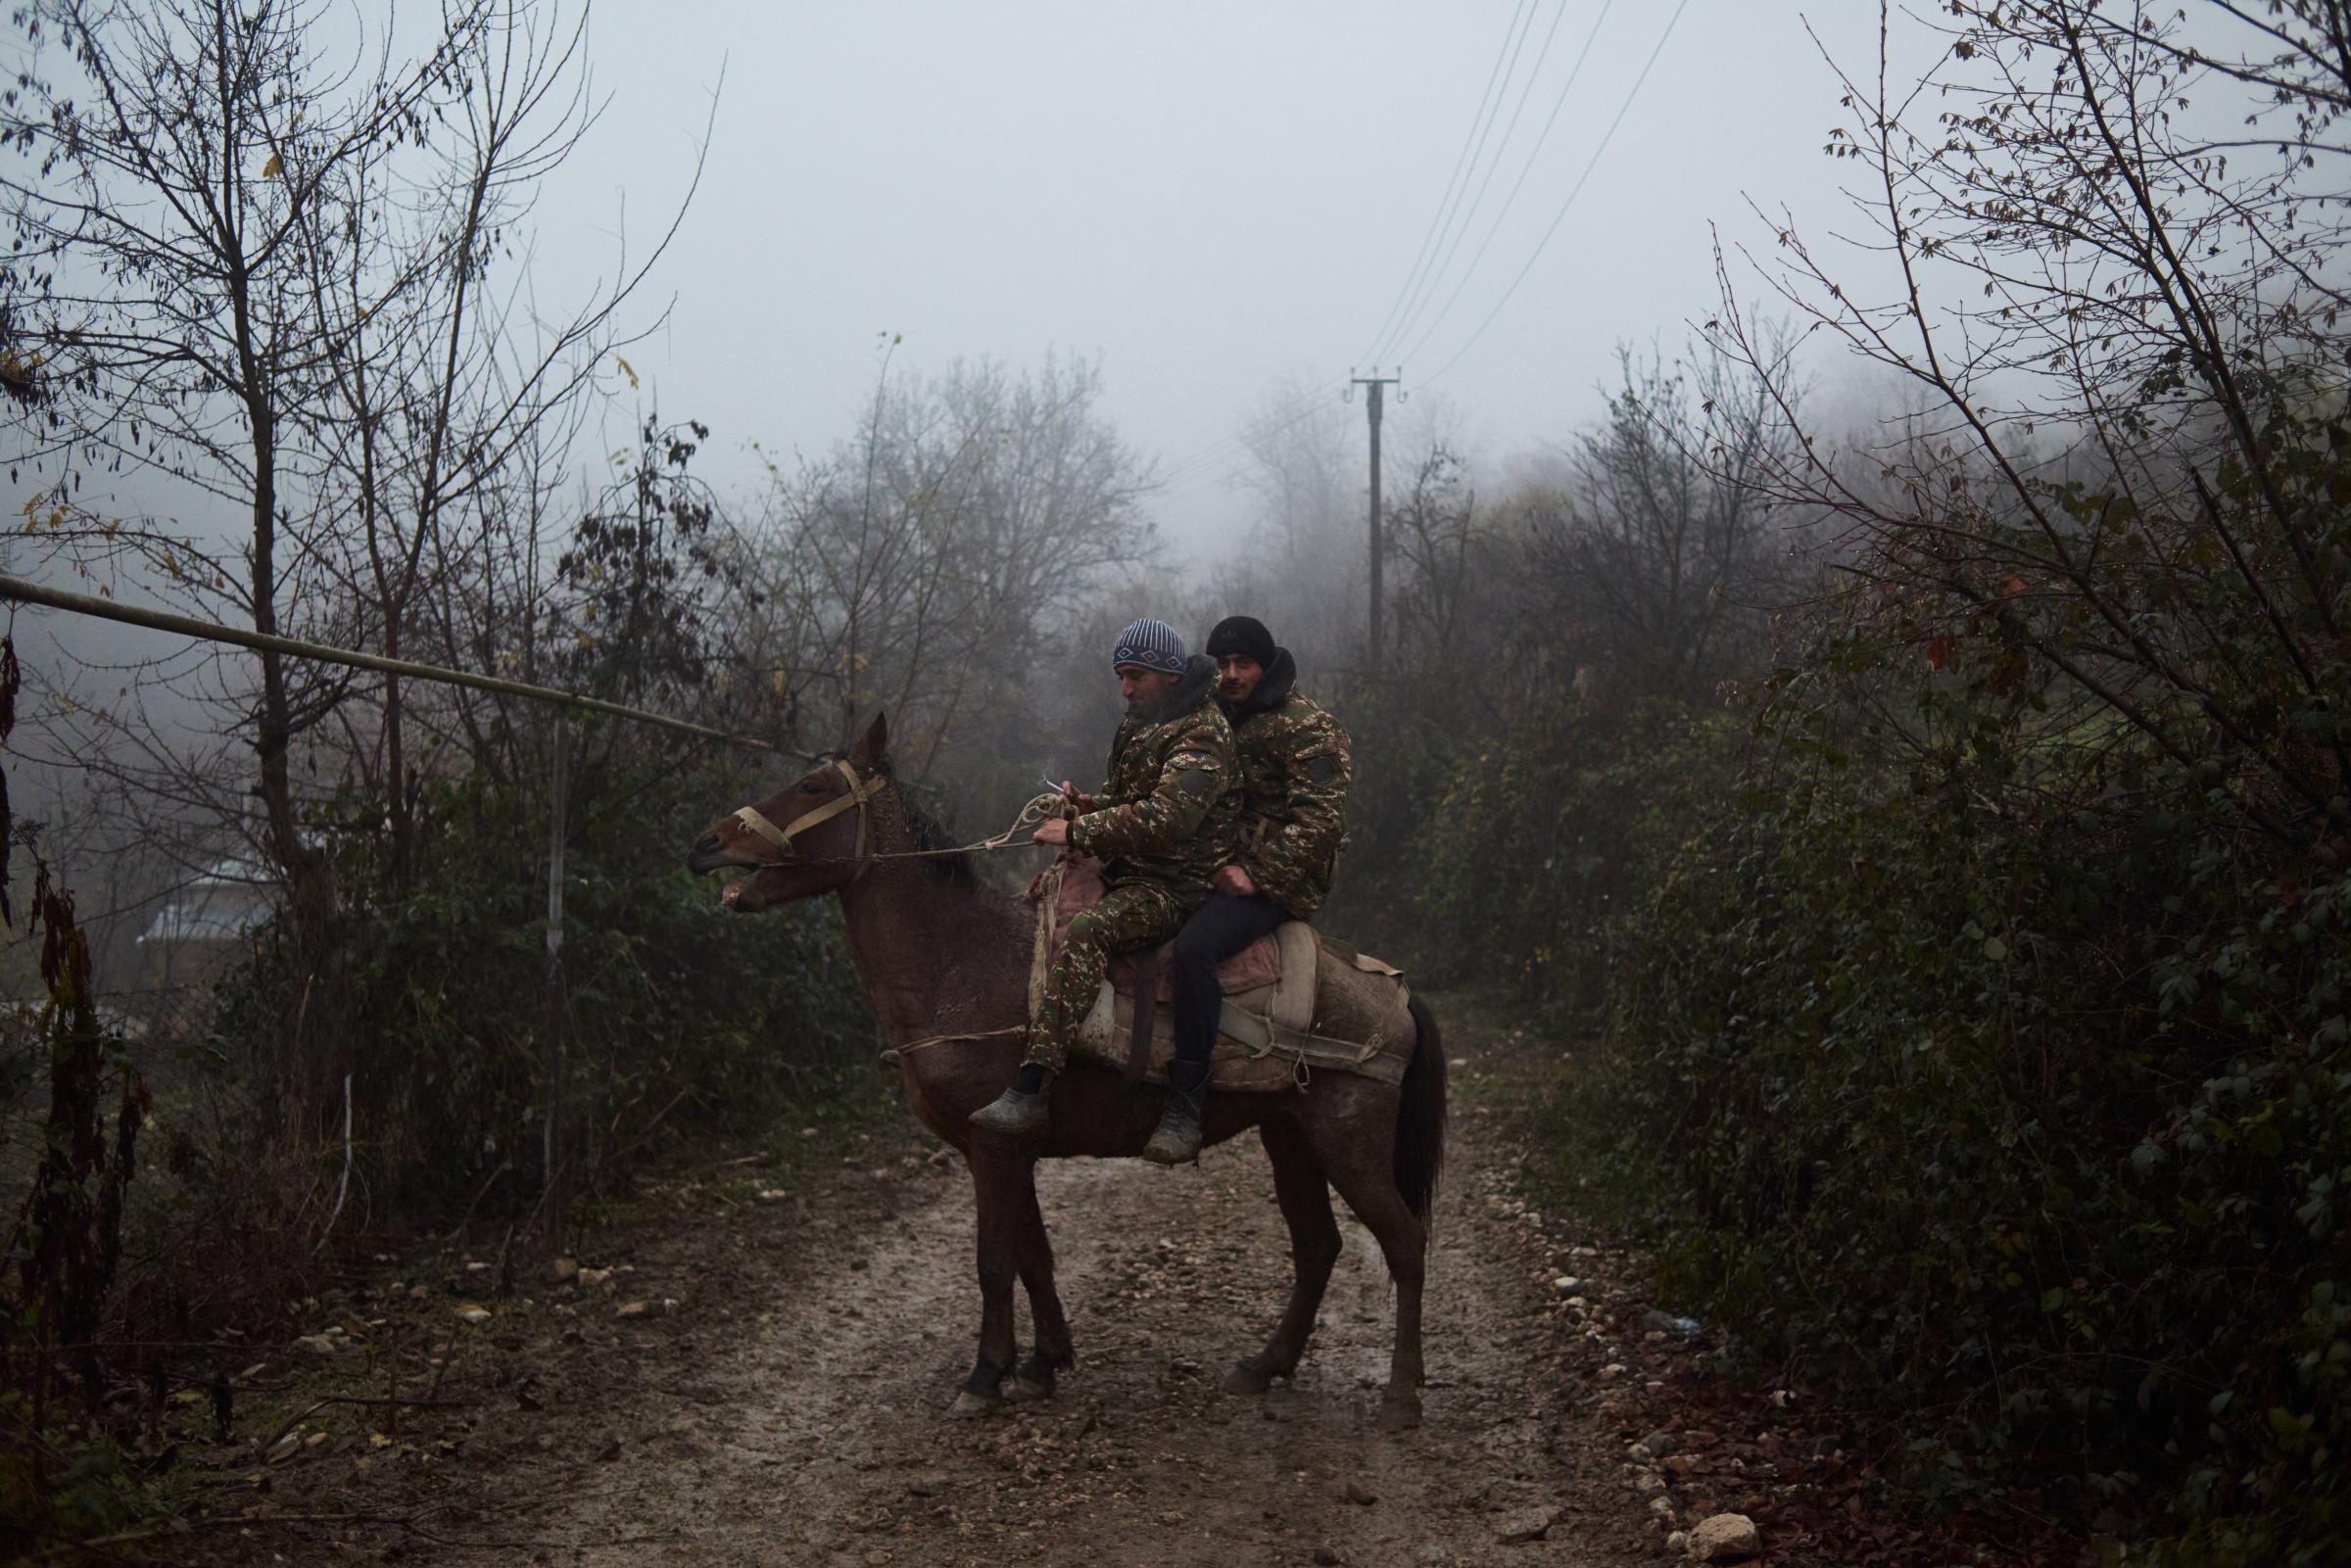 Paradise Lost - Local residents in the village of Tagavard, Nagorno-Karabakh.
Village of Tagavard was divided in...